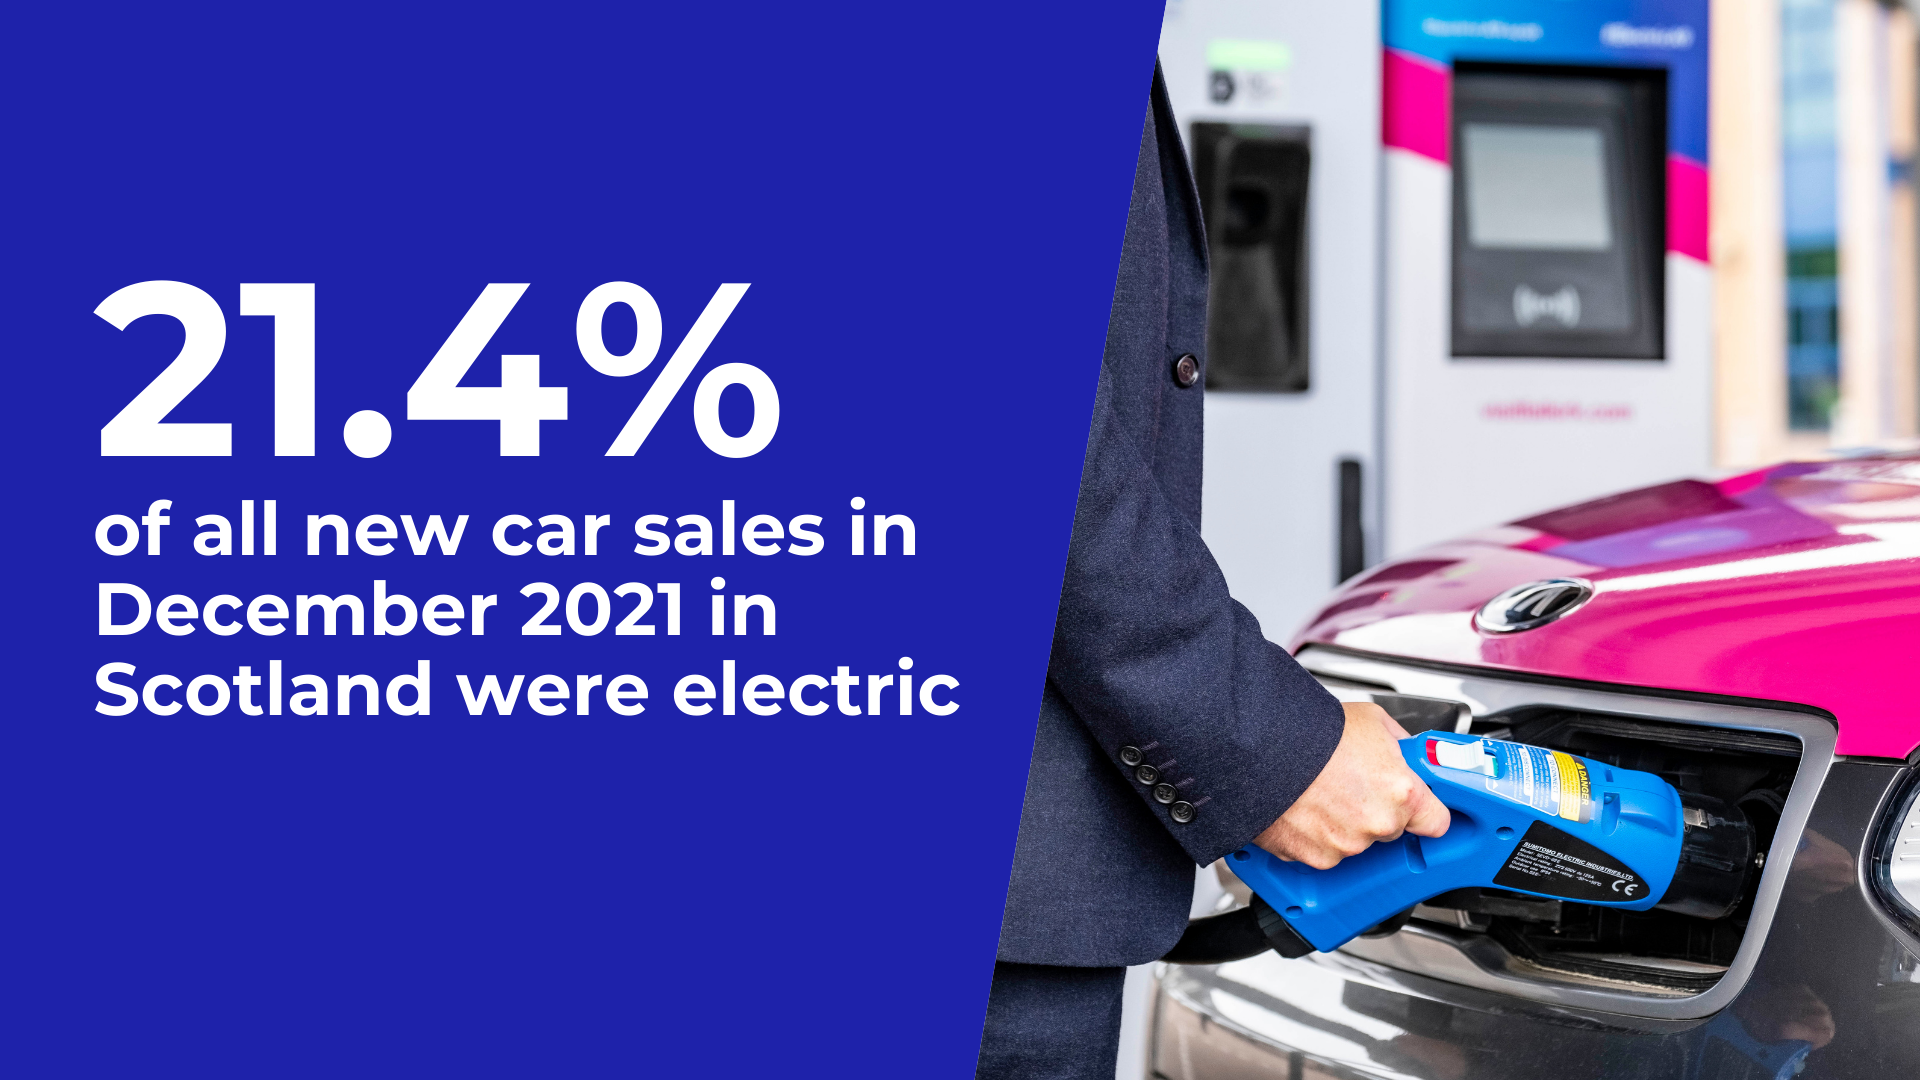 Close up of someone plugging in an electric car into a chargepoint. Caption: 21.4% of all new car sales in December 2021 in Scotland were electric.